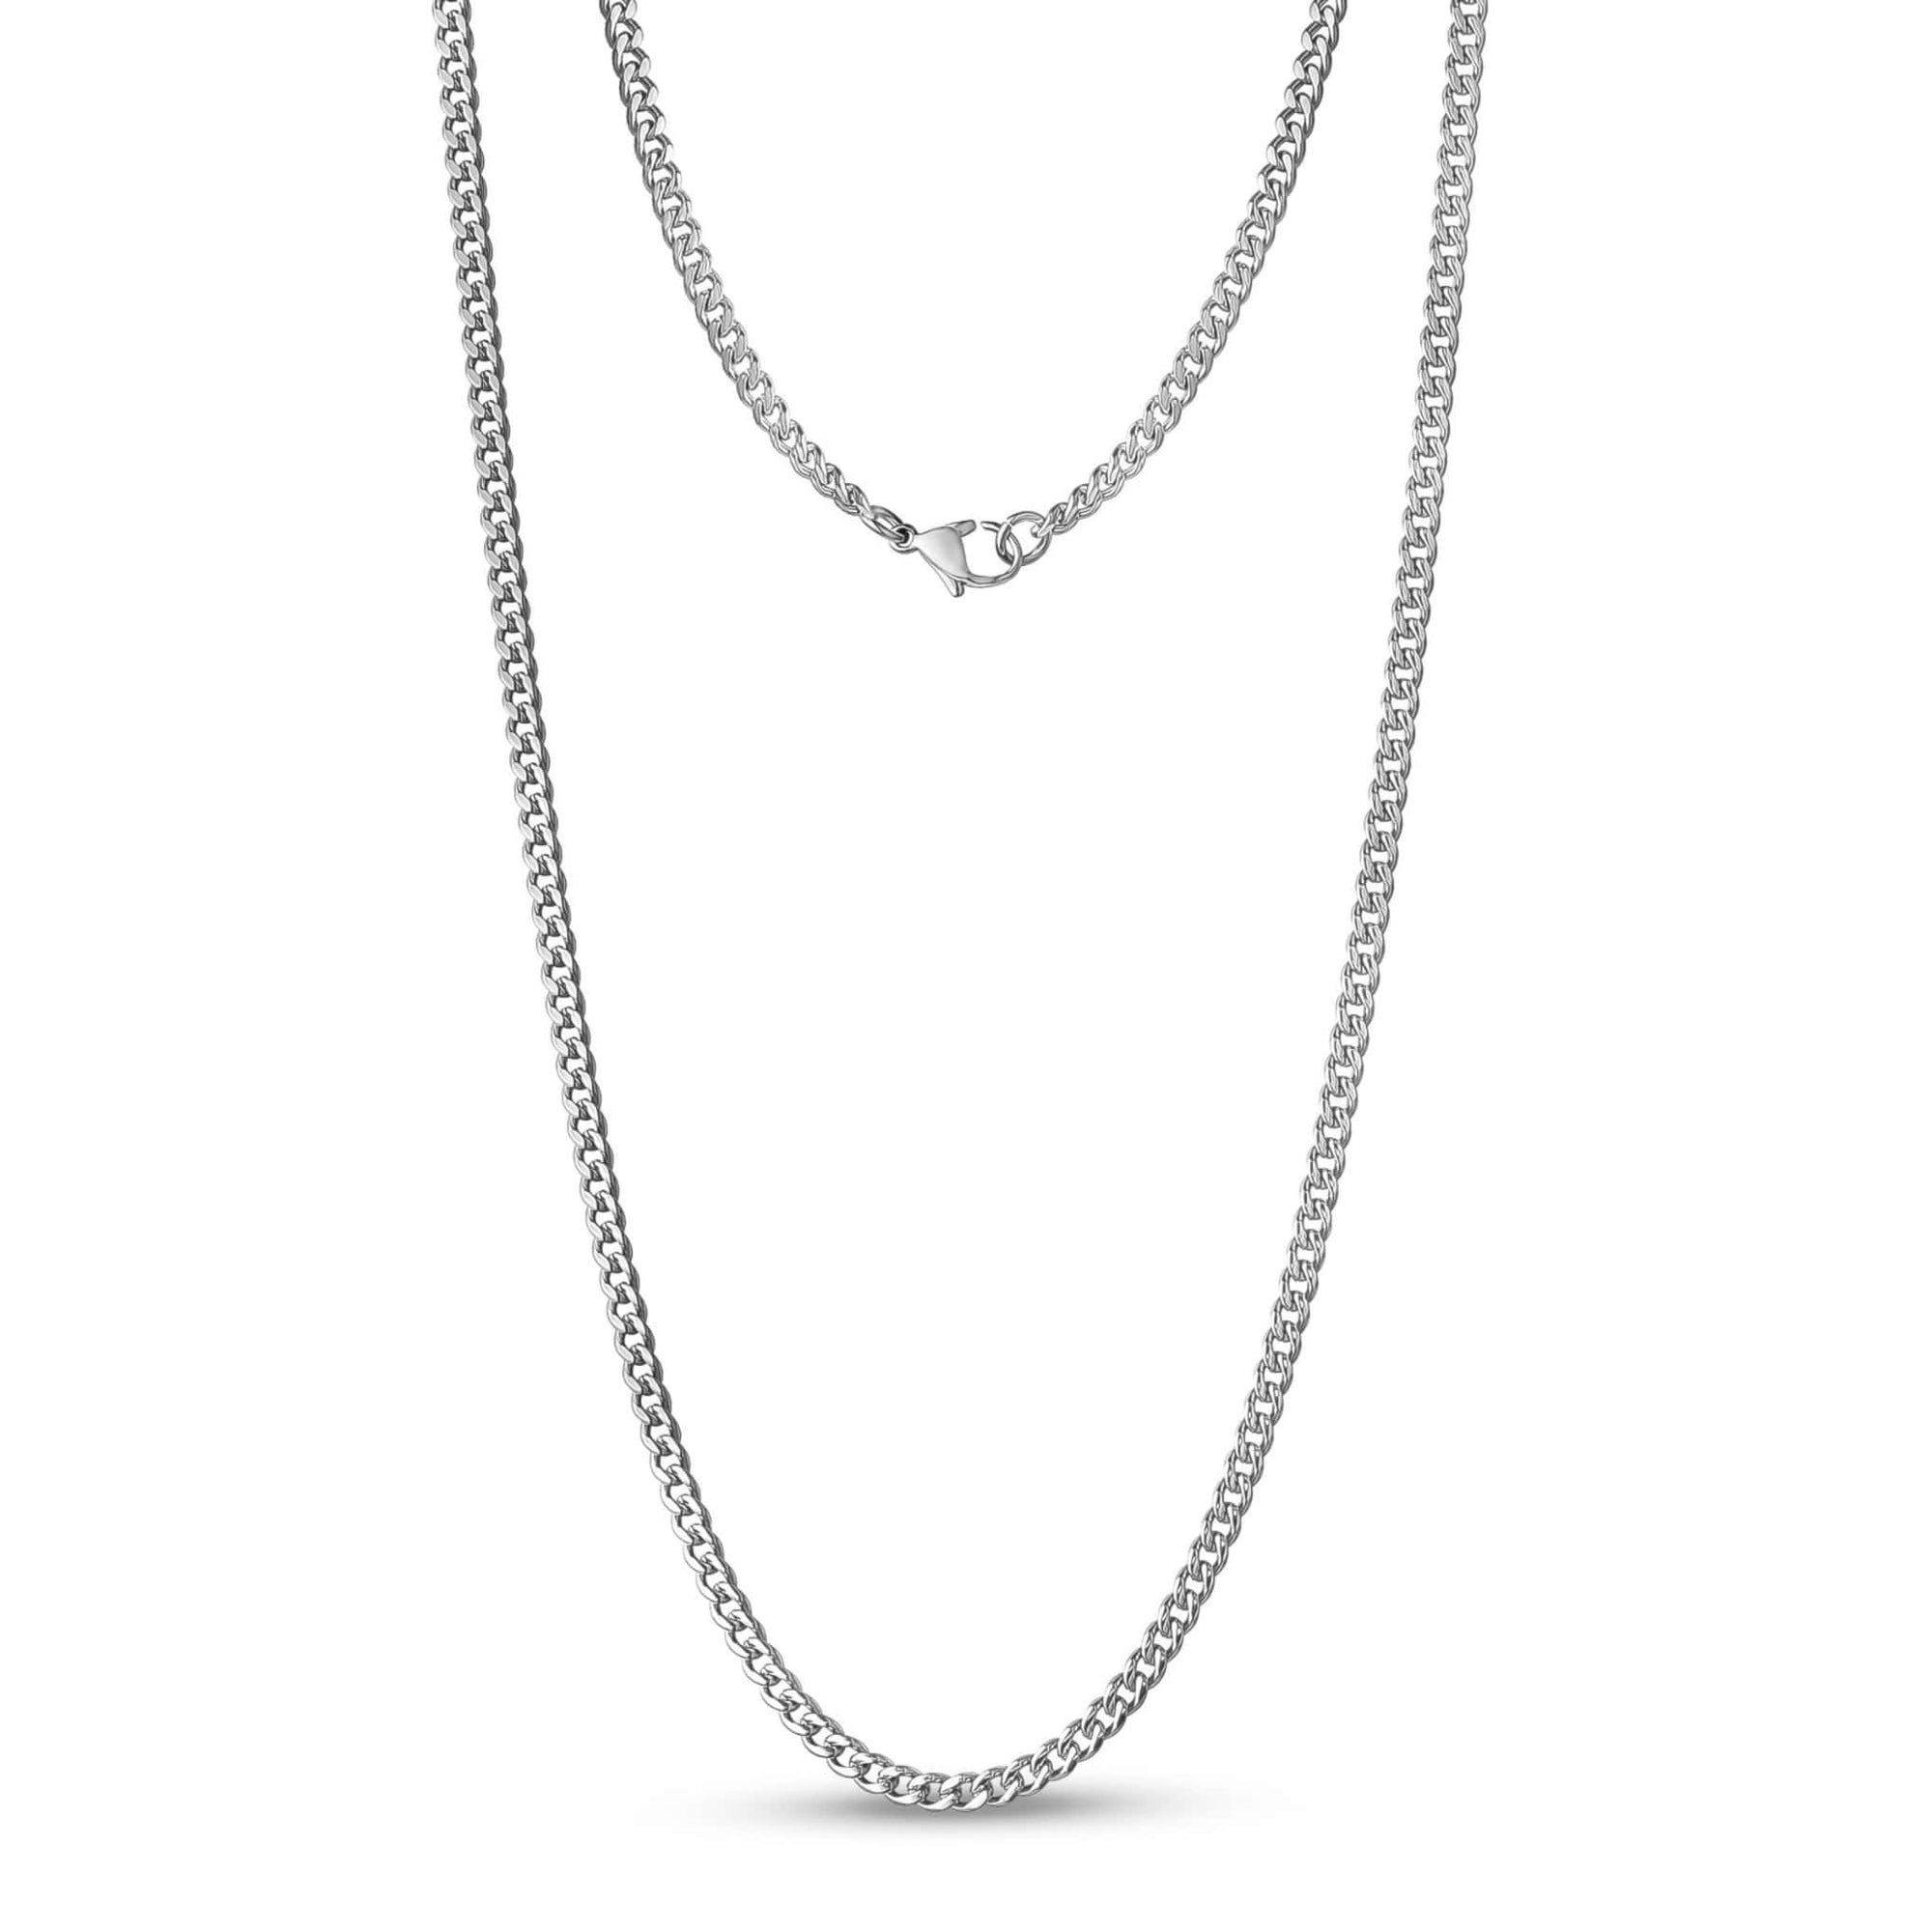 3.5mm Steel Curb Link Chain Necklace at Arman's Jewellers